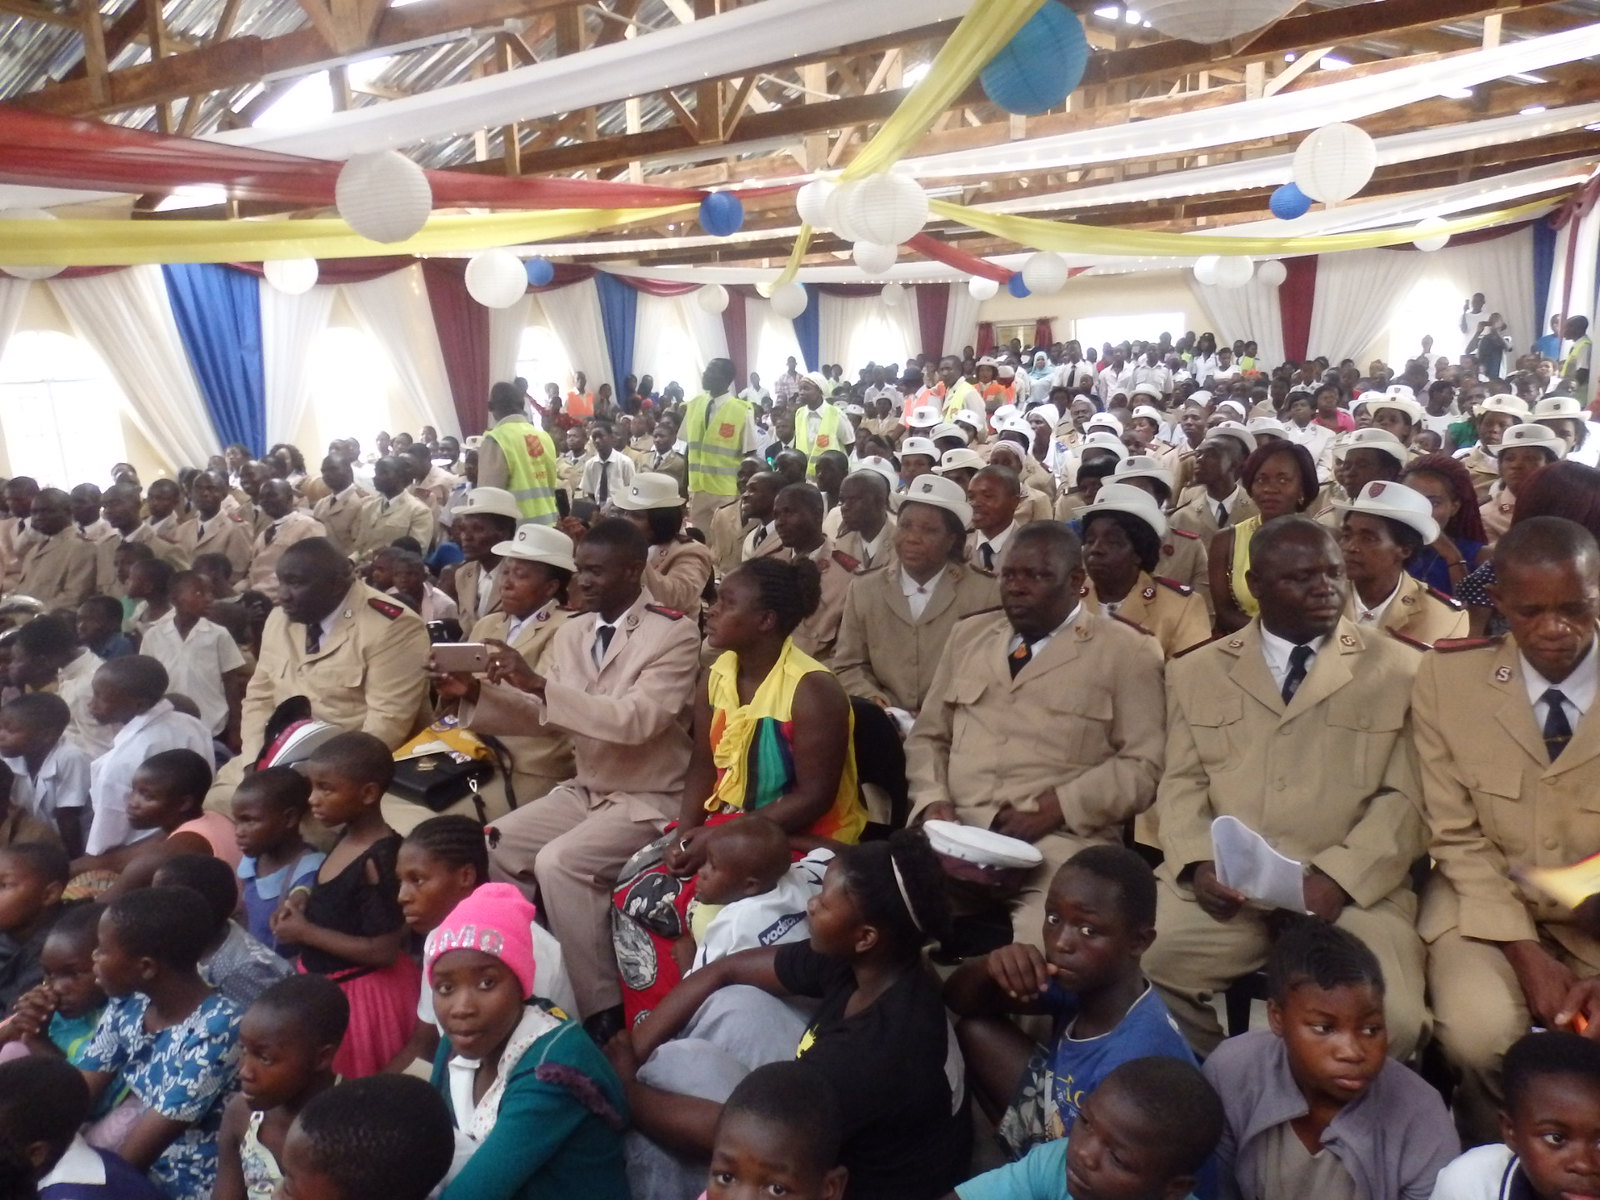 Bangwe hall packed to capacity